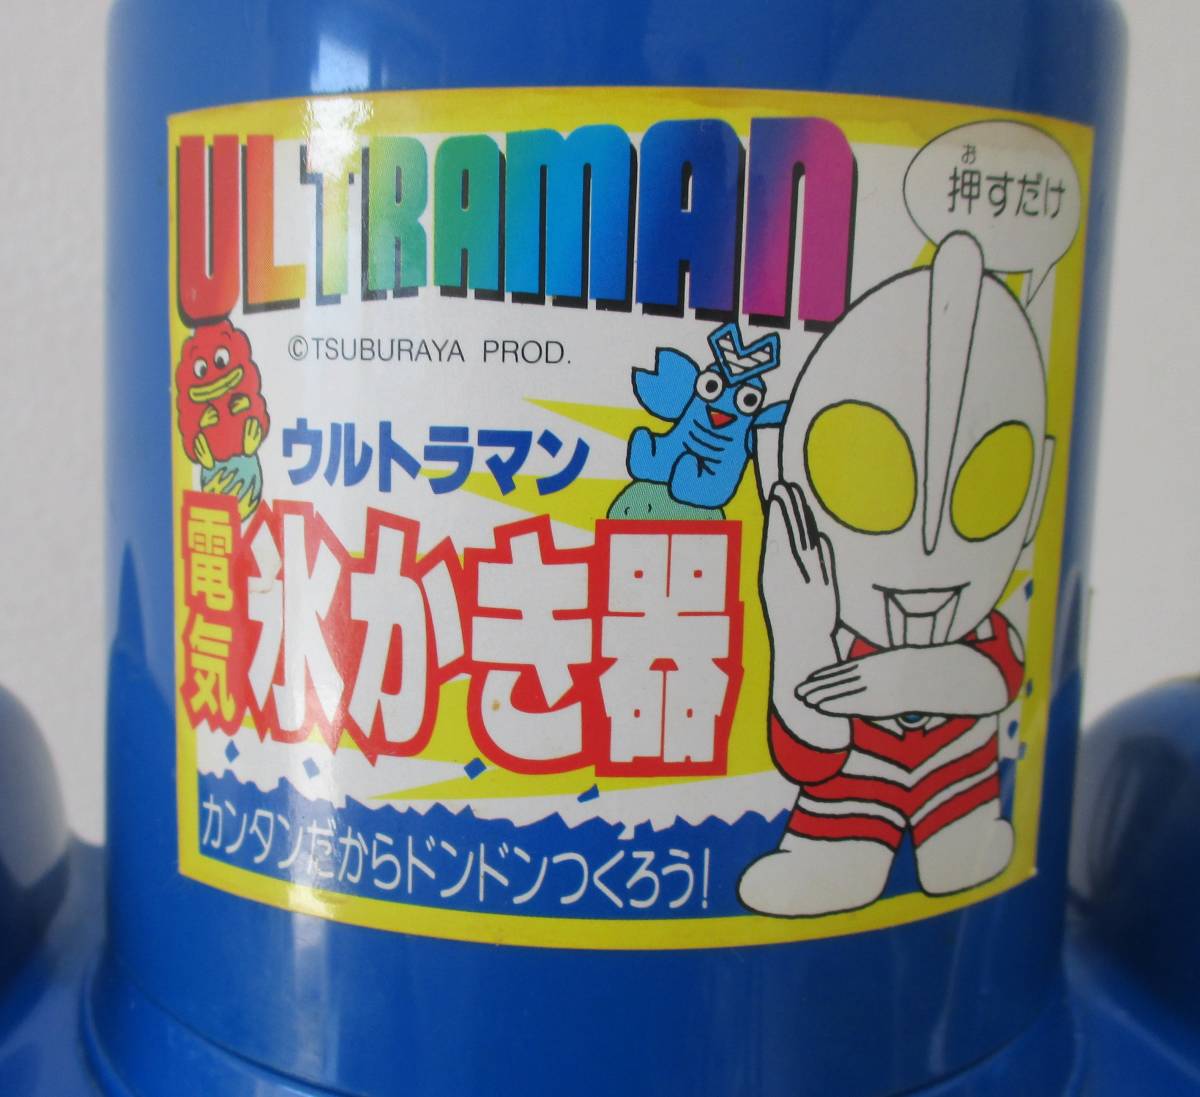  electrification has confirmed Ultraman electric ice .. electric ice chipping machine USED goods 